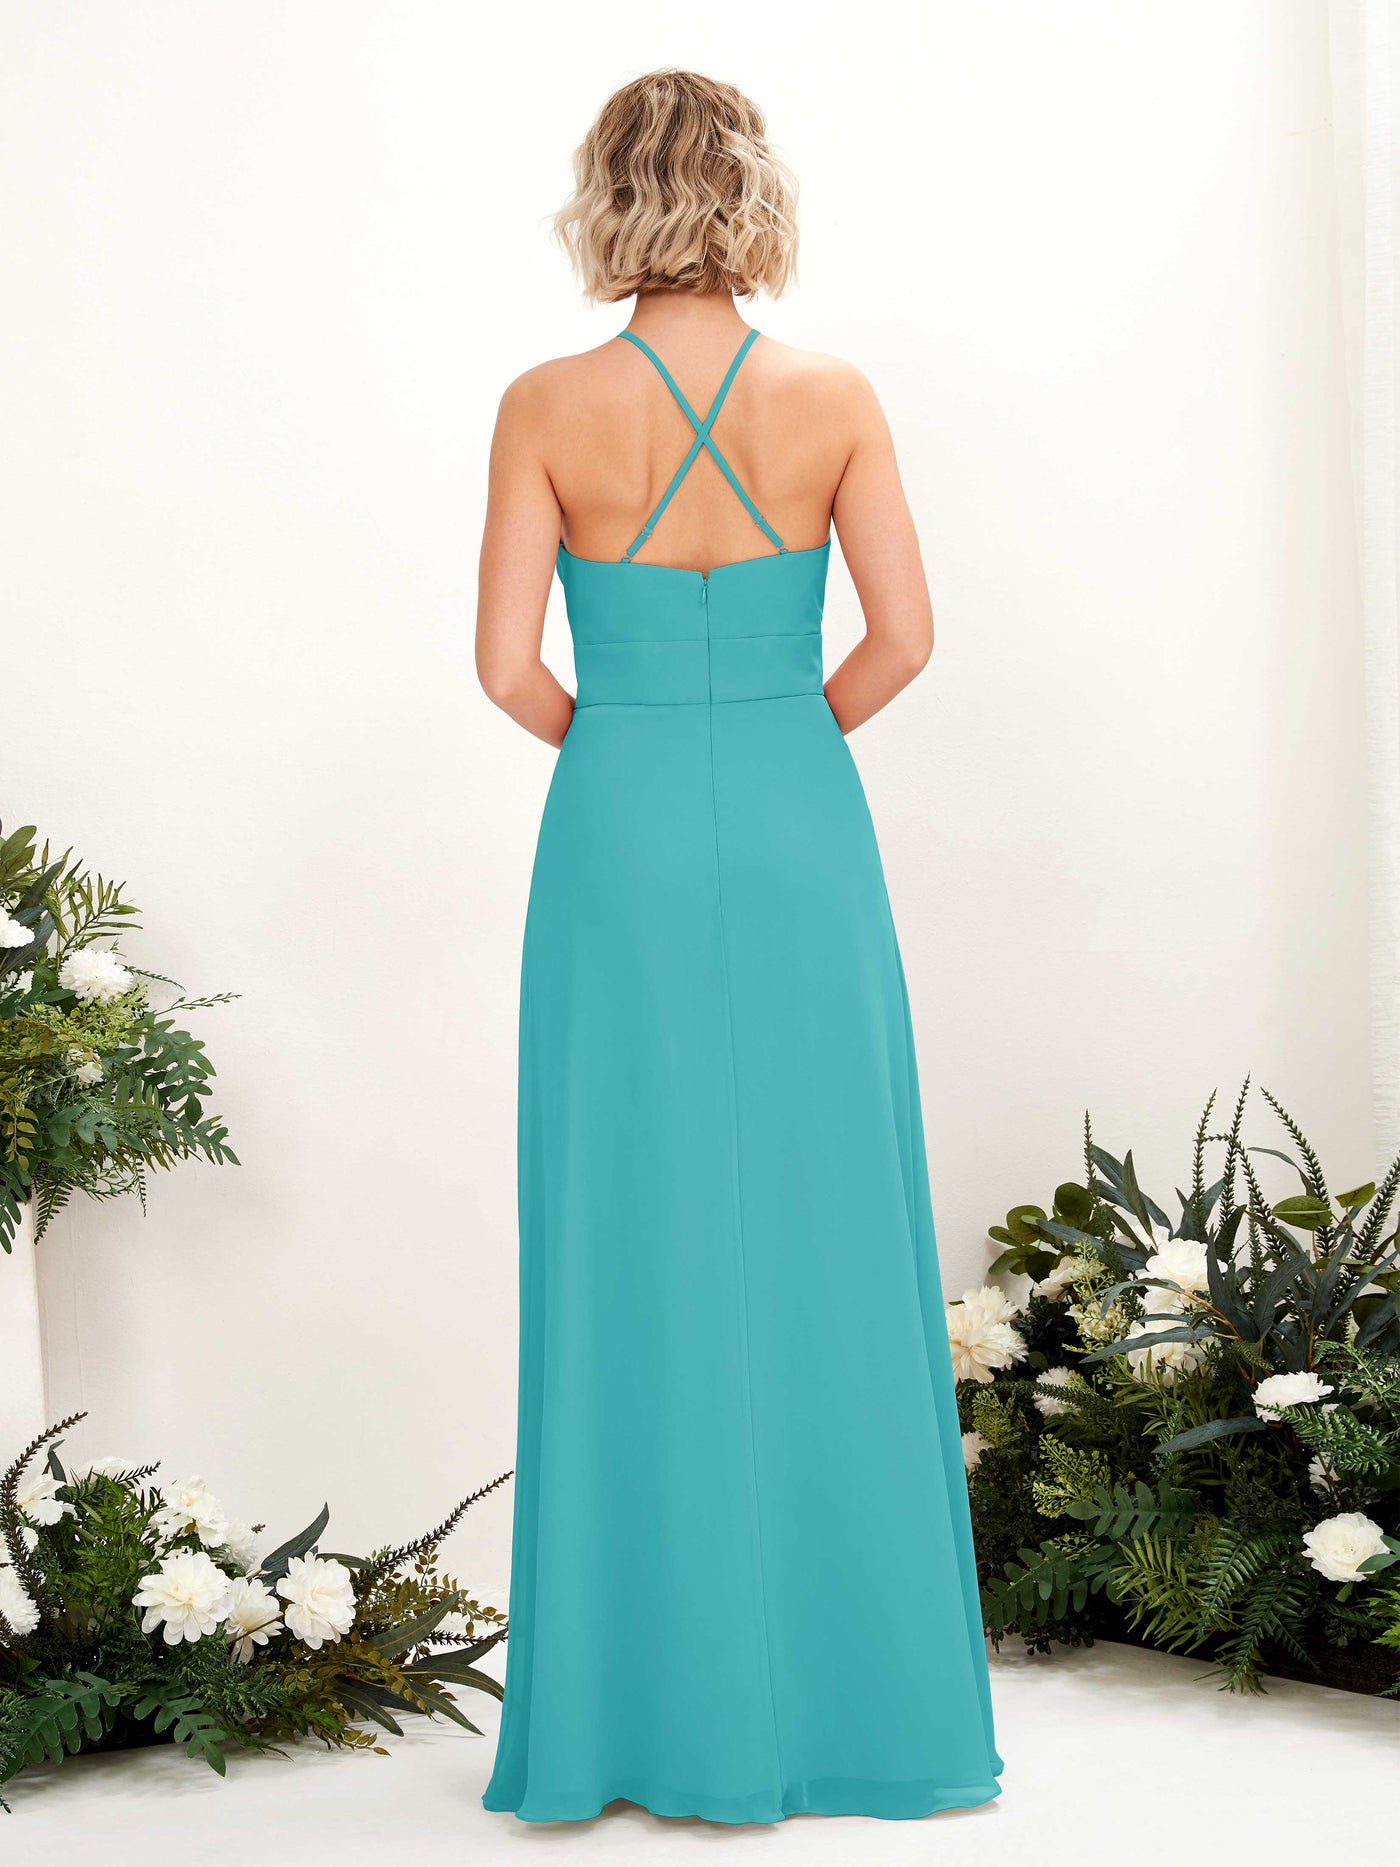 Turquoise Bridesmaid Dresses Bridesmaid Dress A-line Chiffon Halter Full Length Sleeveless Wedding Party Dress (81225223)#color_turquoise